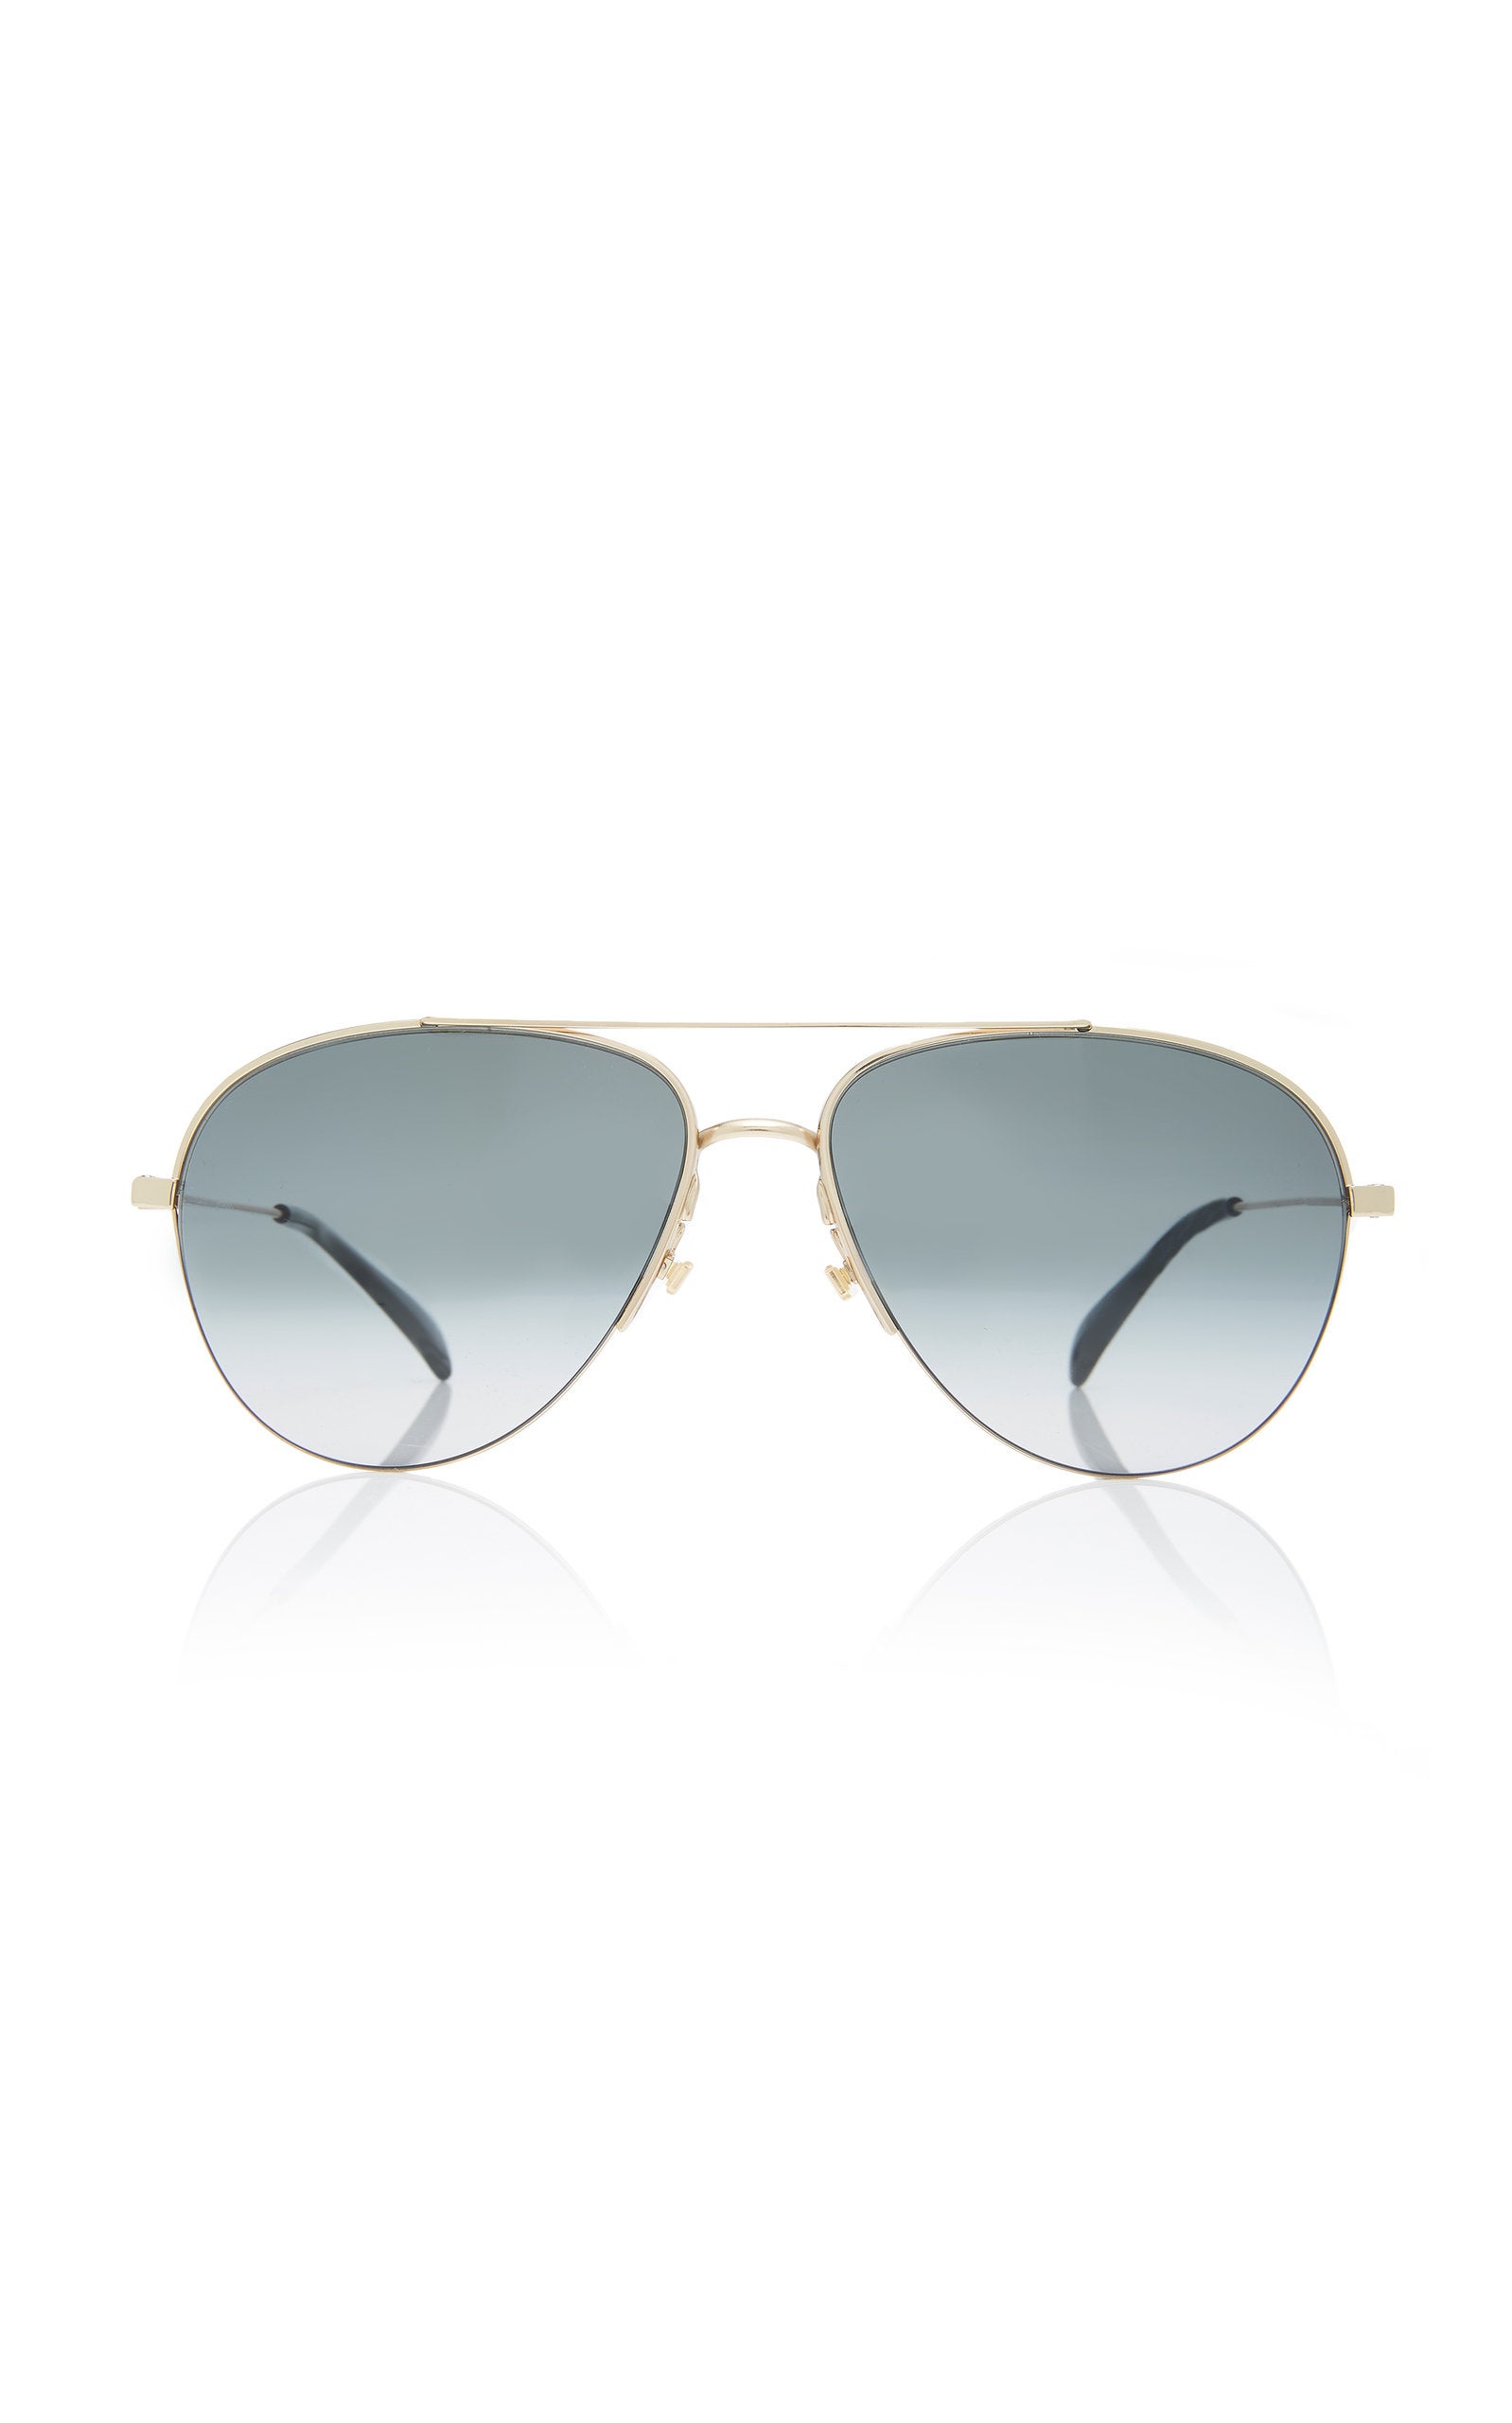 Givenchy + Metal Aviator Sunglasses by Givenchy